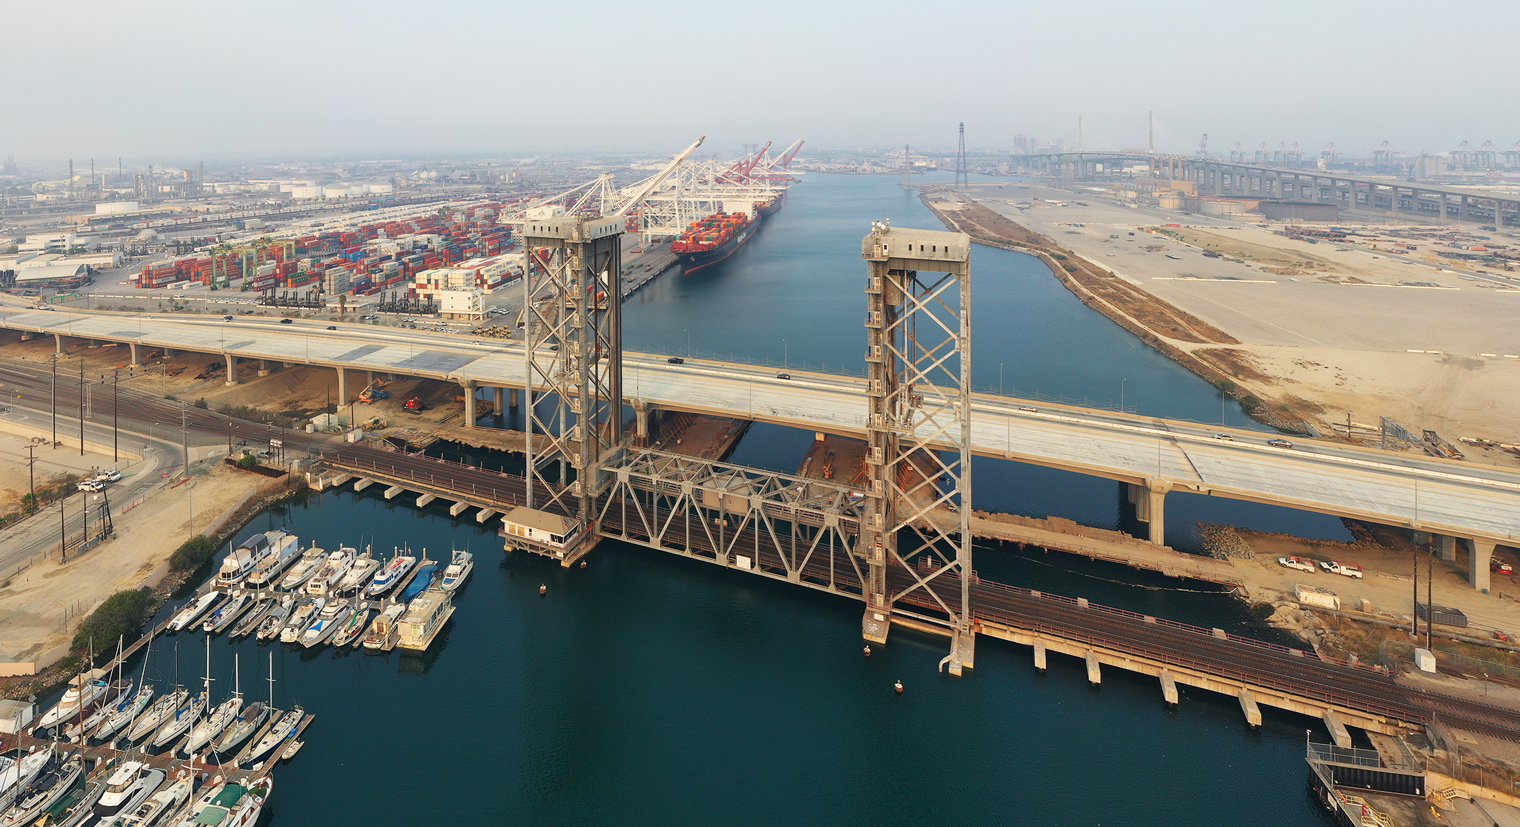 Aerial view of the Commodore Schuyler F. Heim Bridge and spanning the waterway between Terminal Island and Long Beach.